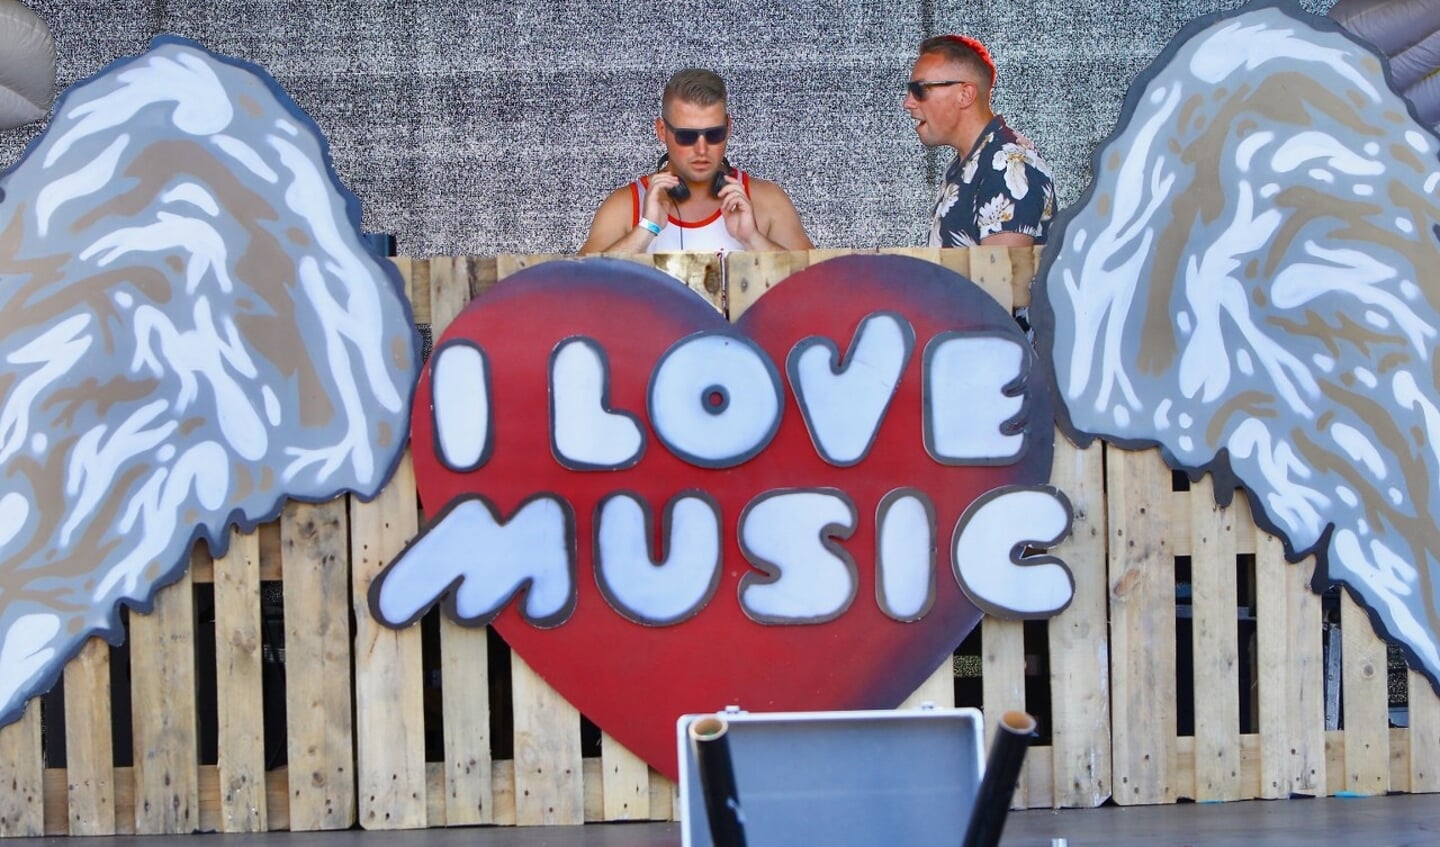 I love music by dvv Delft